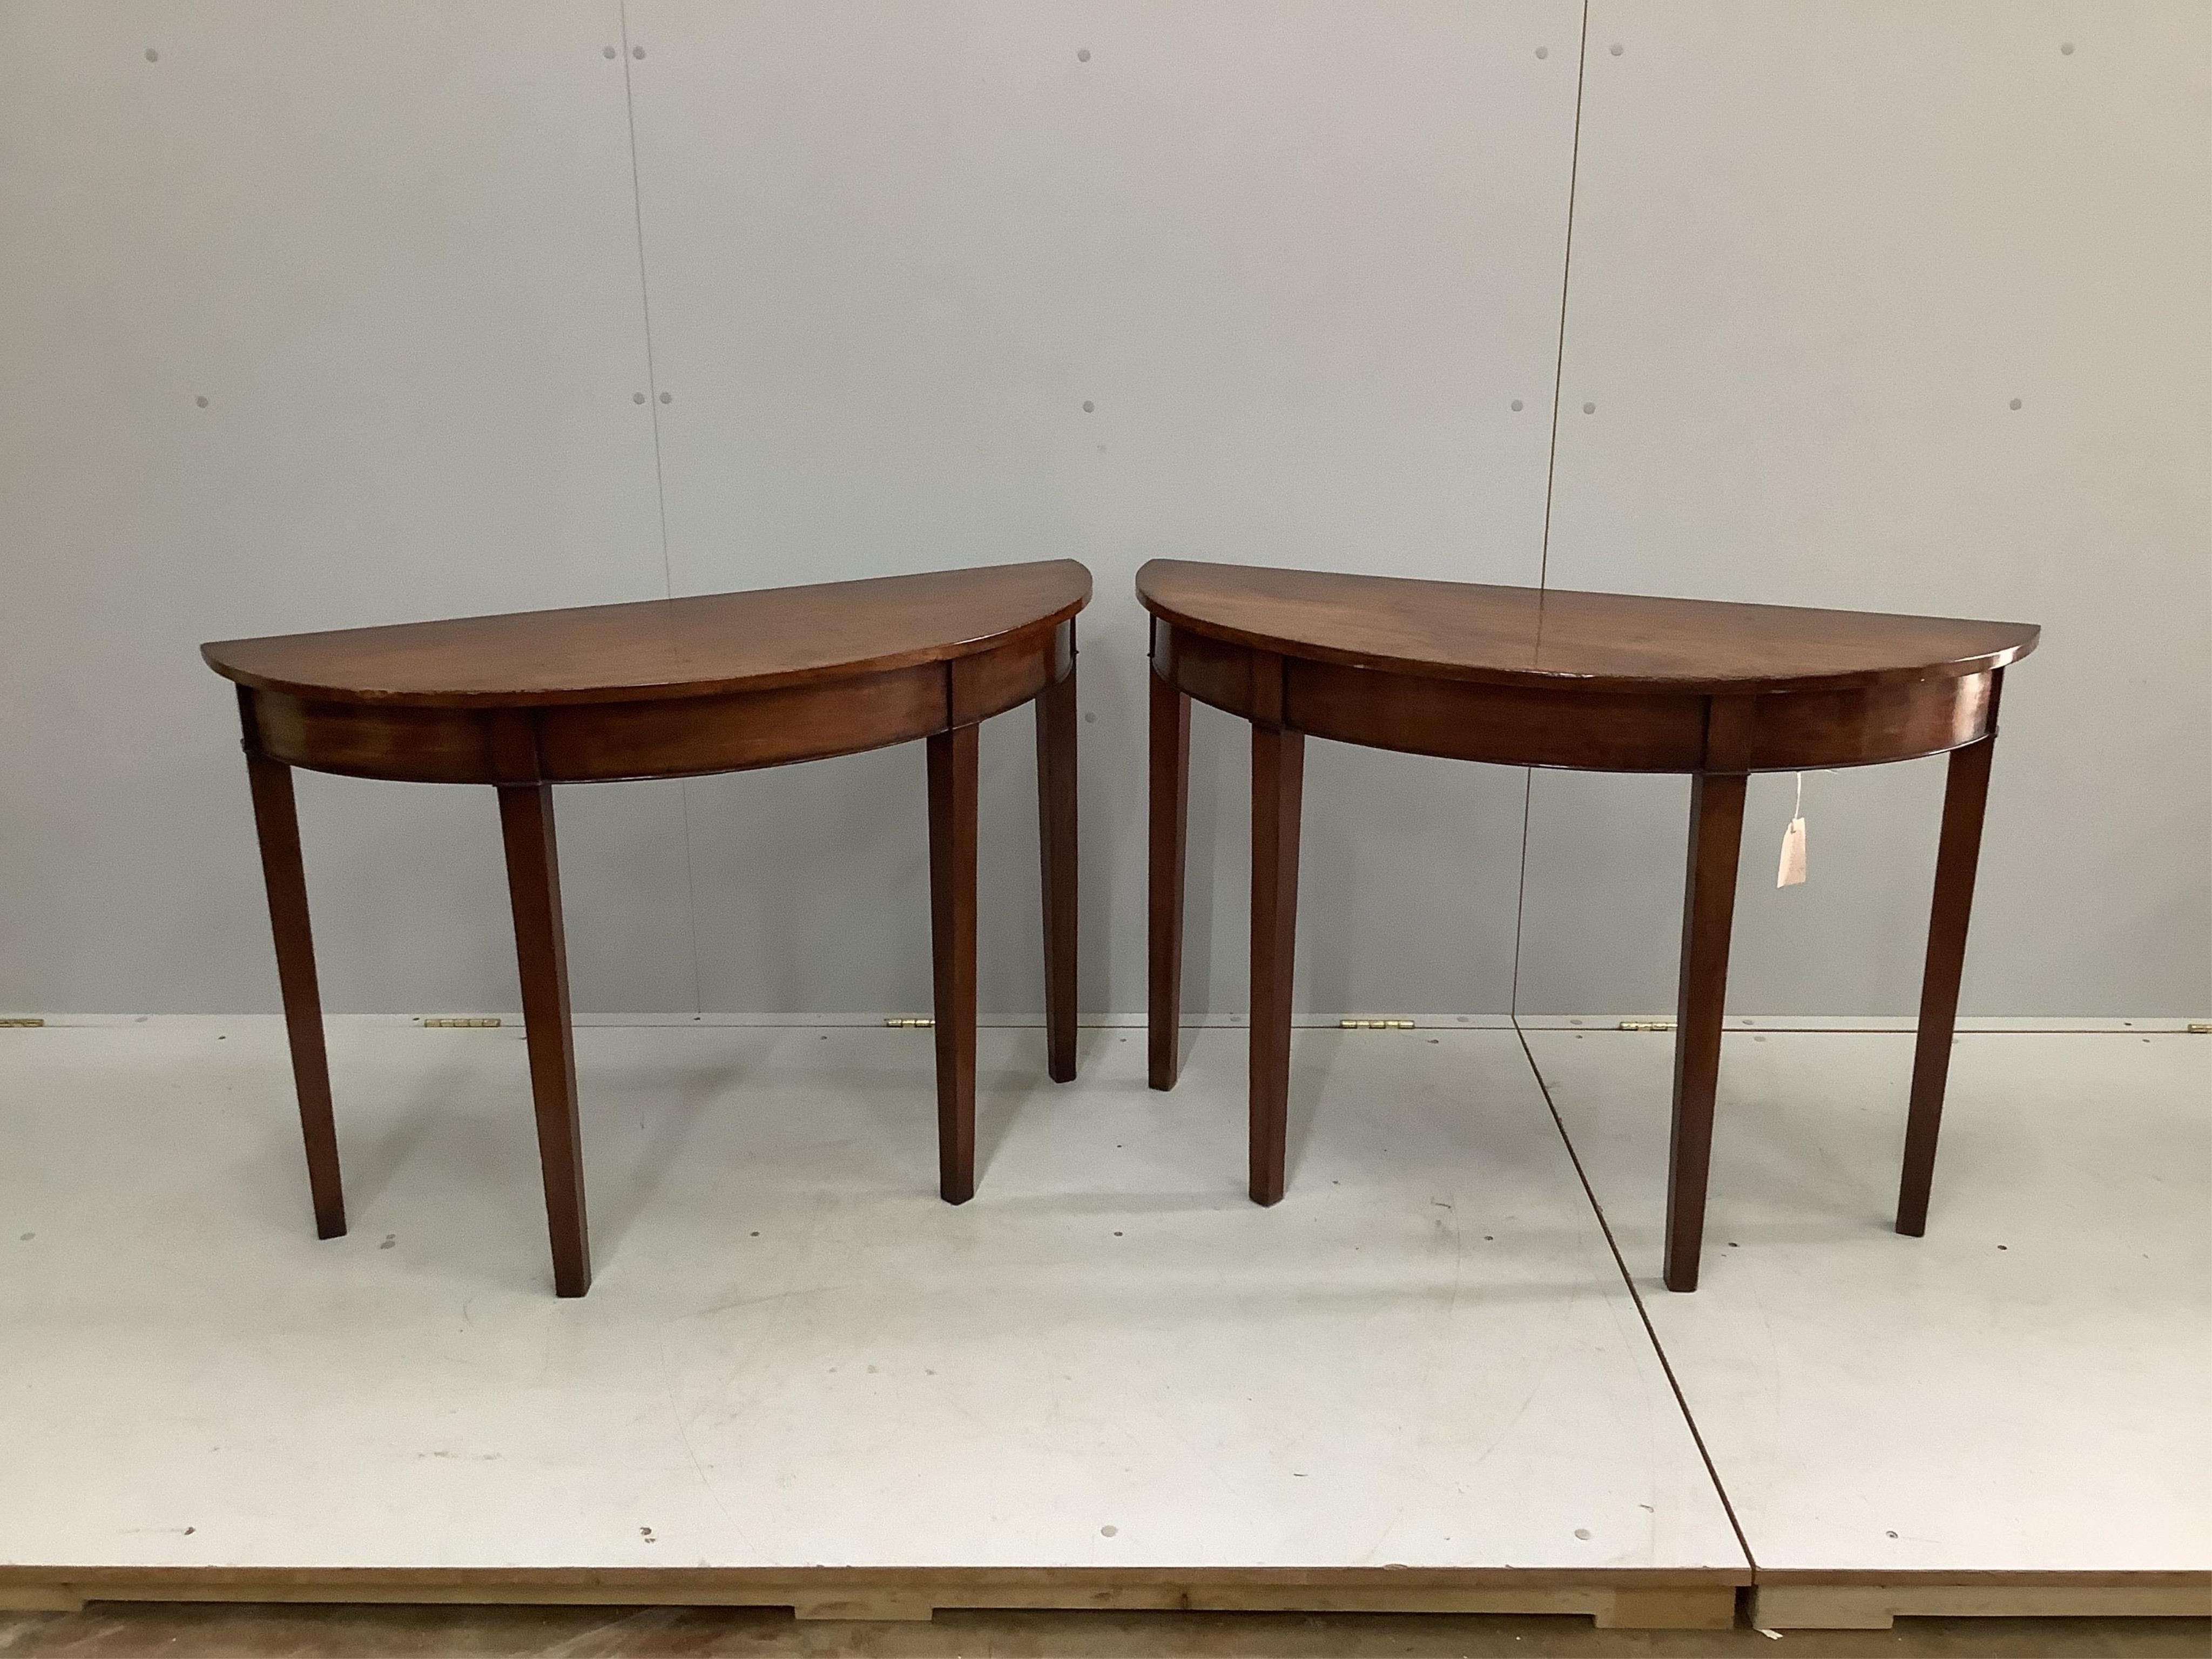 A pair of George III style mahogany D shaped console tables, width 104cm, depth 40cm, height 72cm. Condition - fair